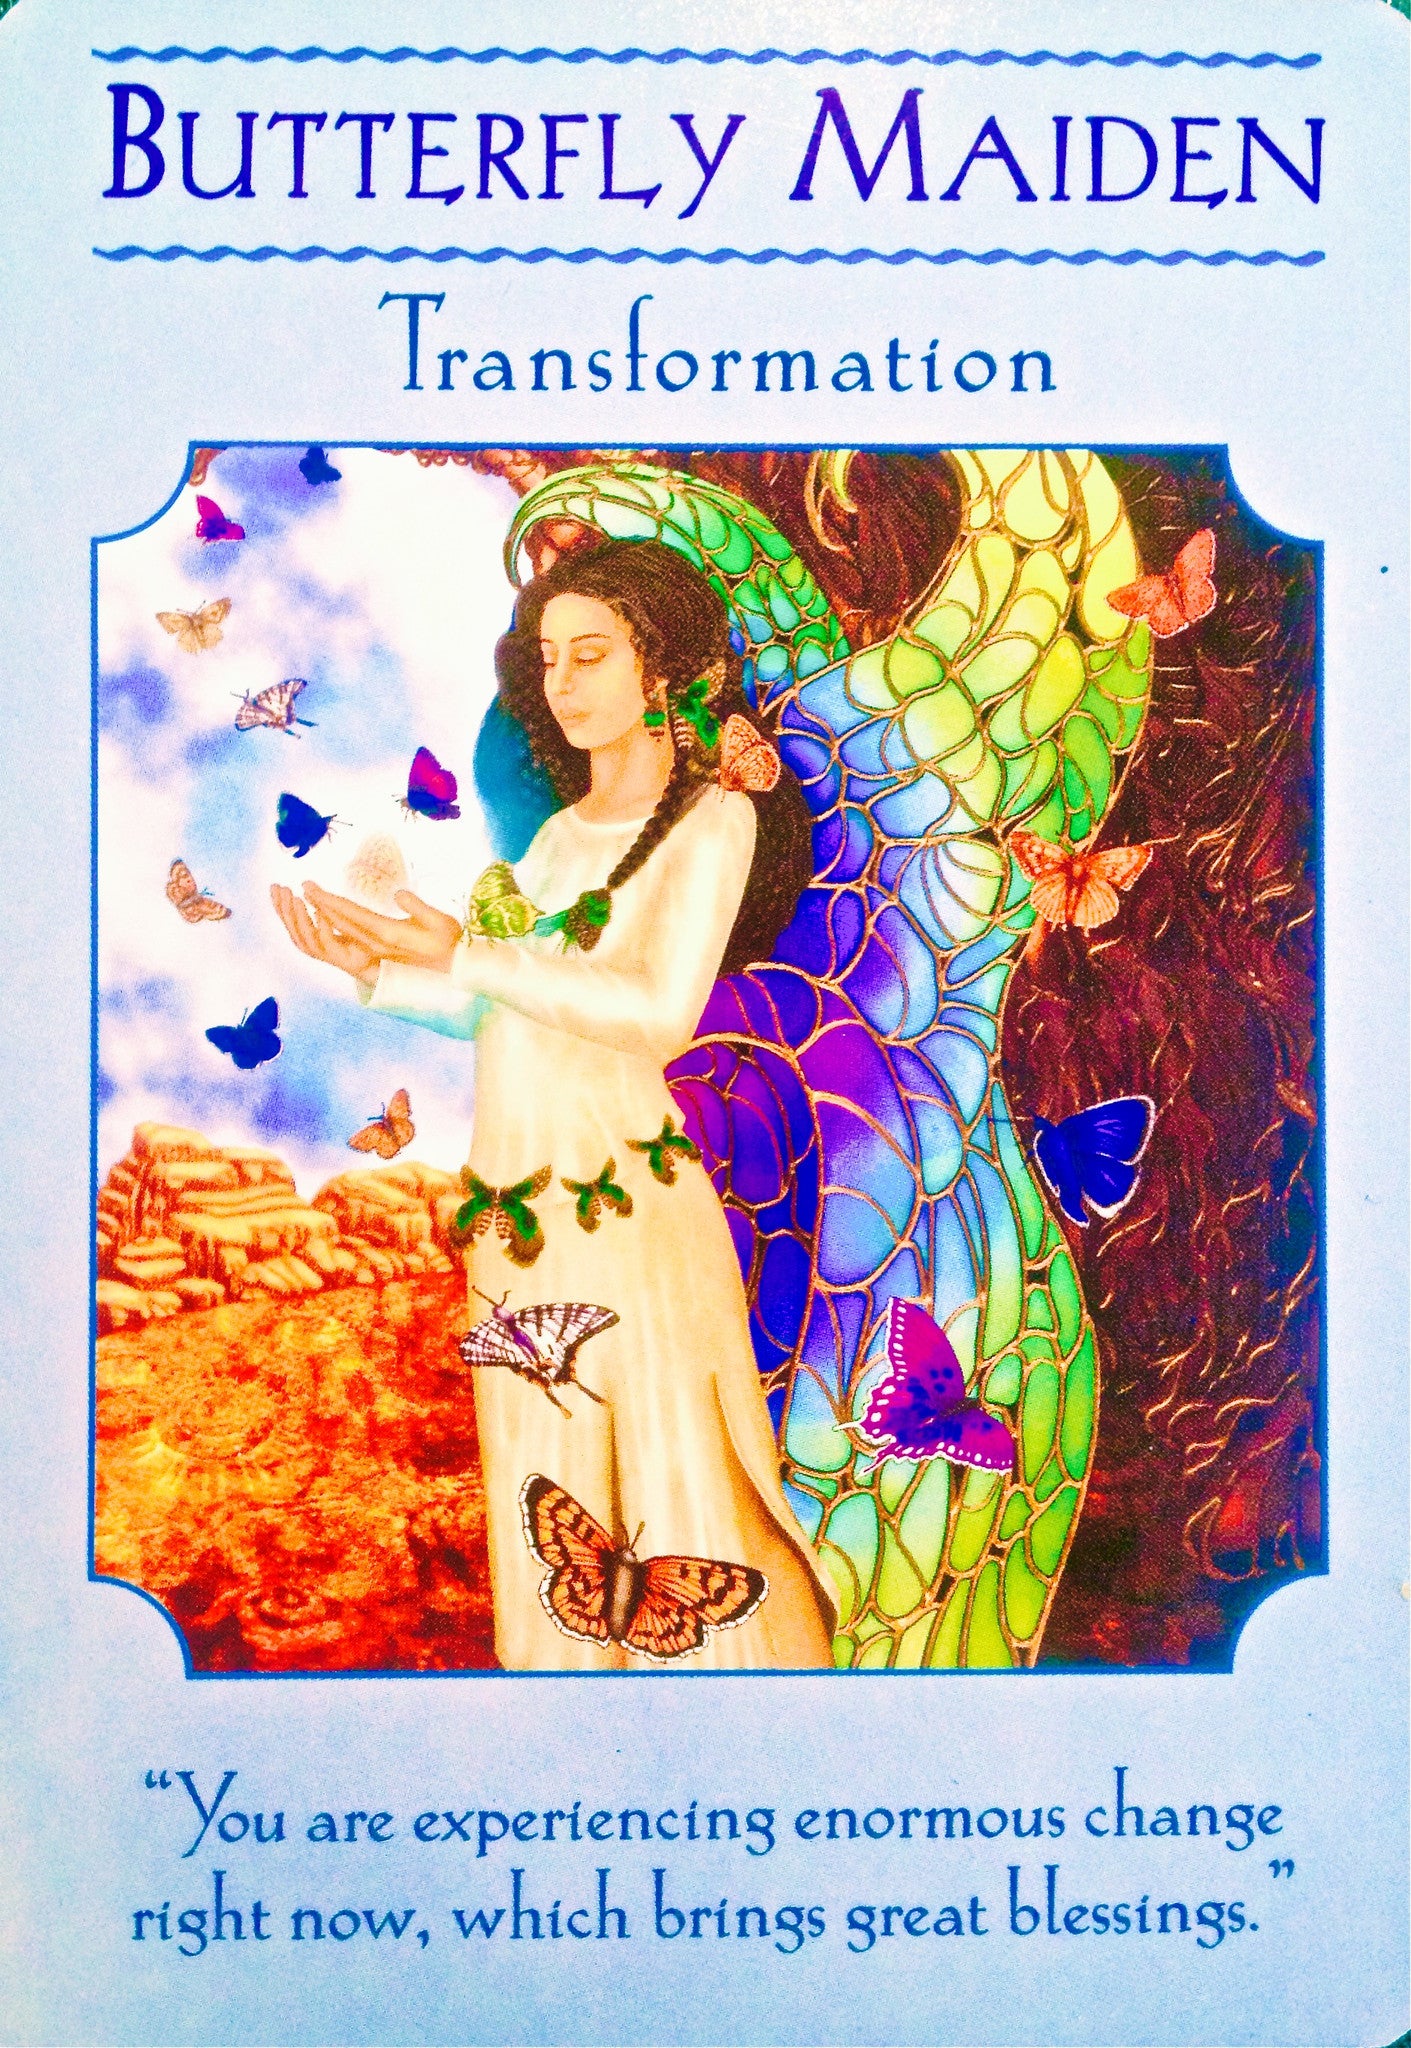 Butterfly Maiden ~ Transformation: “You are experiencing enormous change right now, which brings great blessing.”